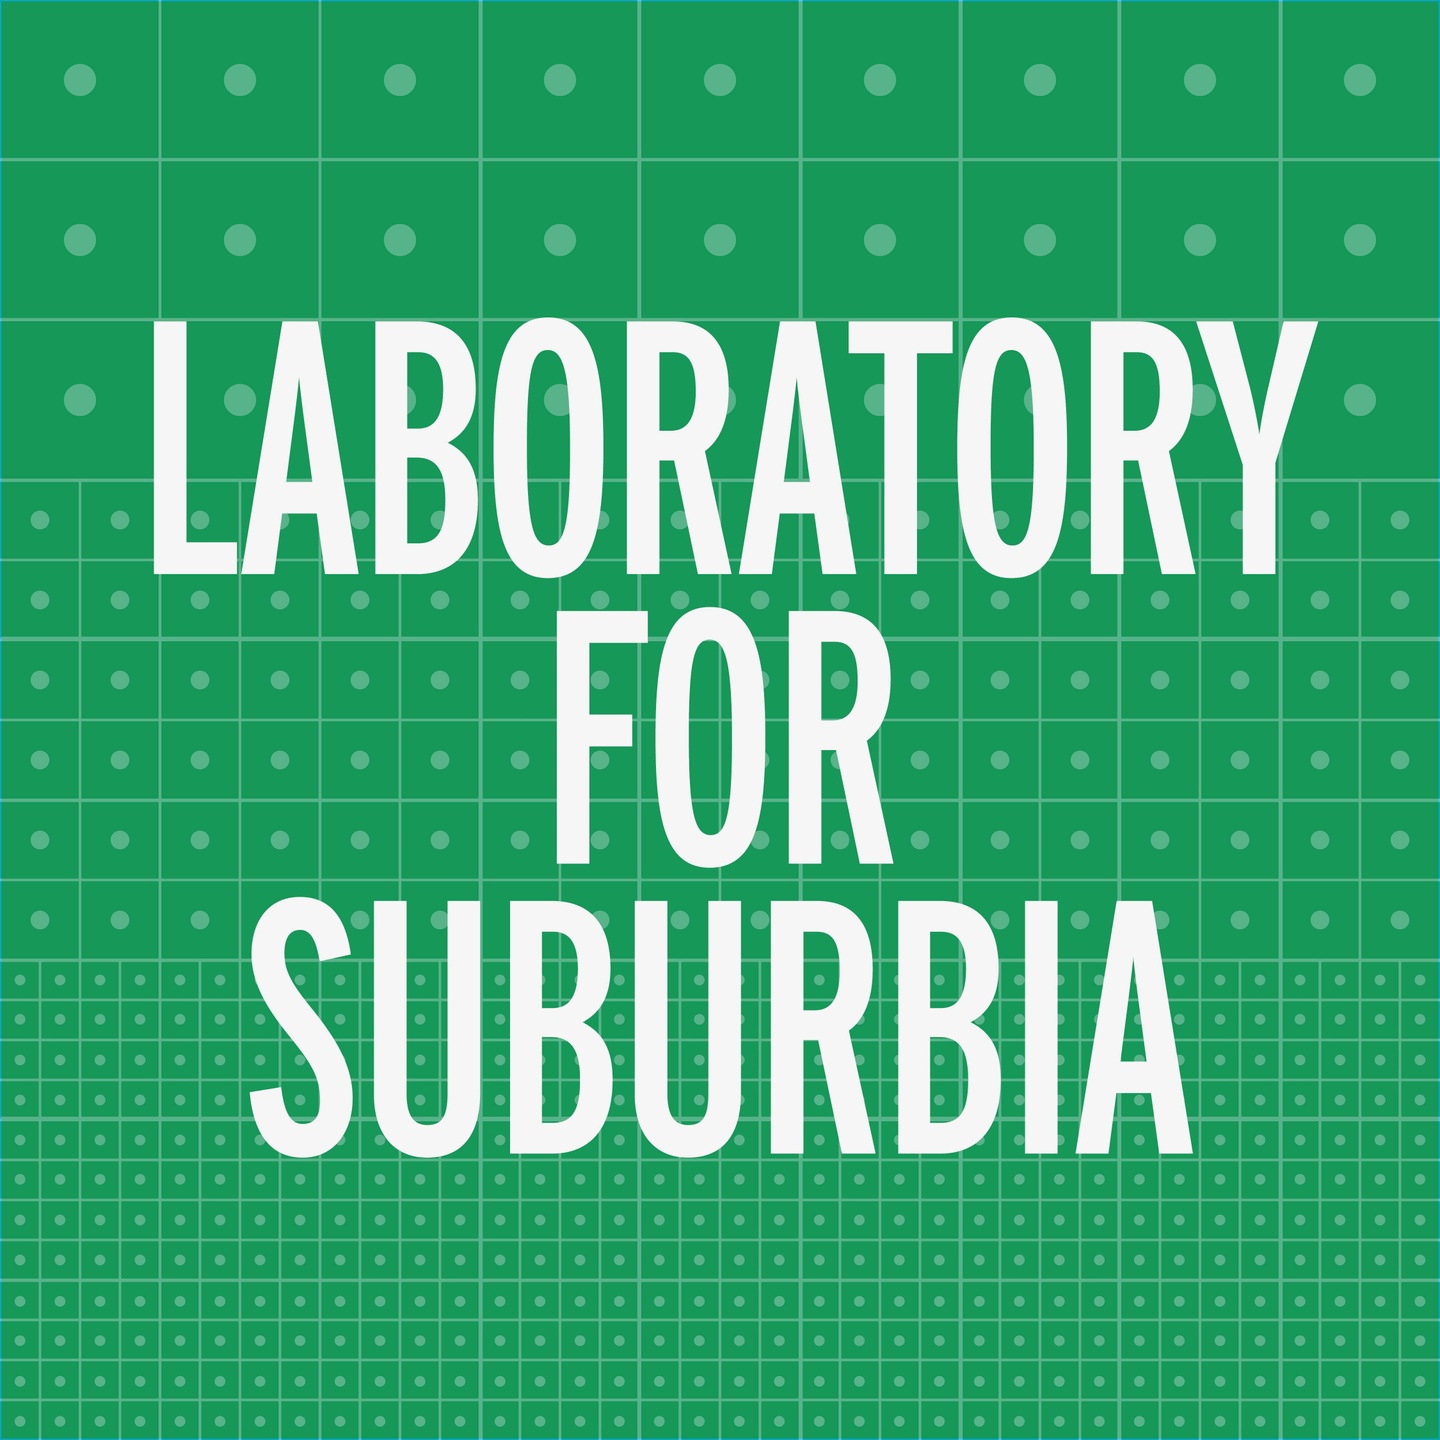 green background with all capital text "Laboratory for Suburbia"